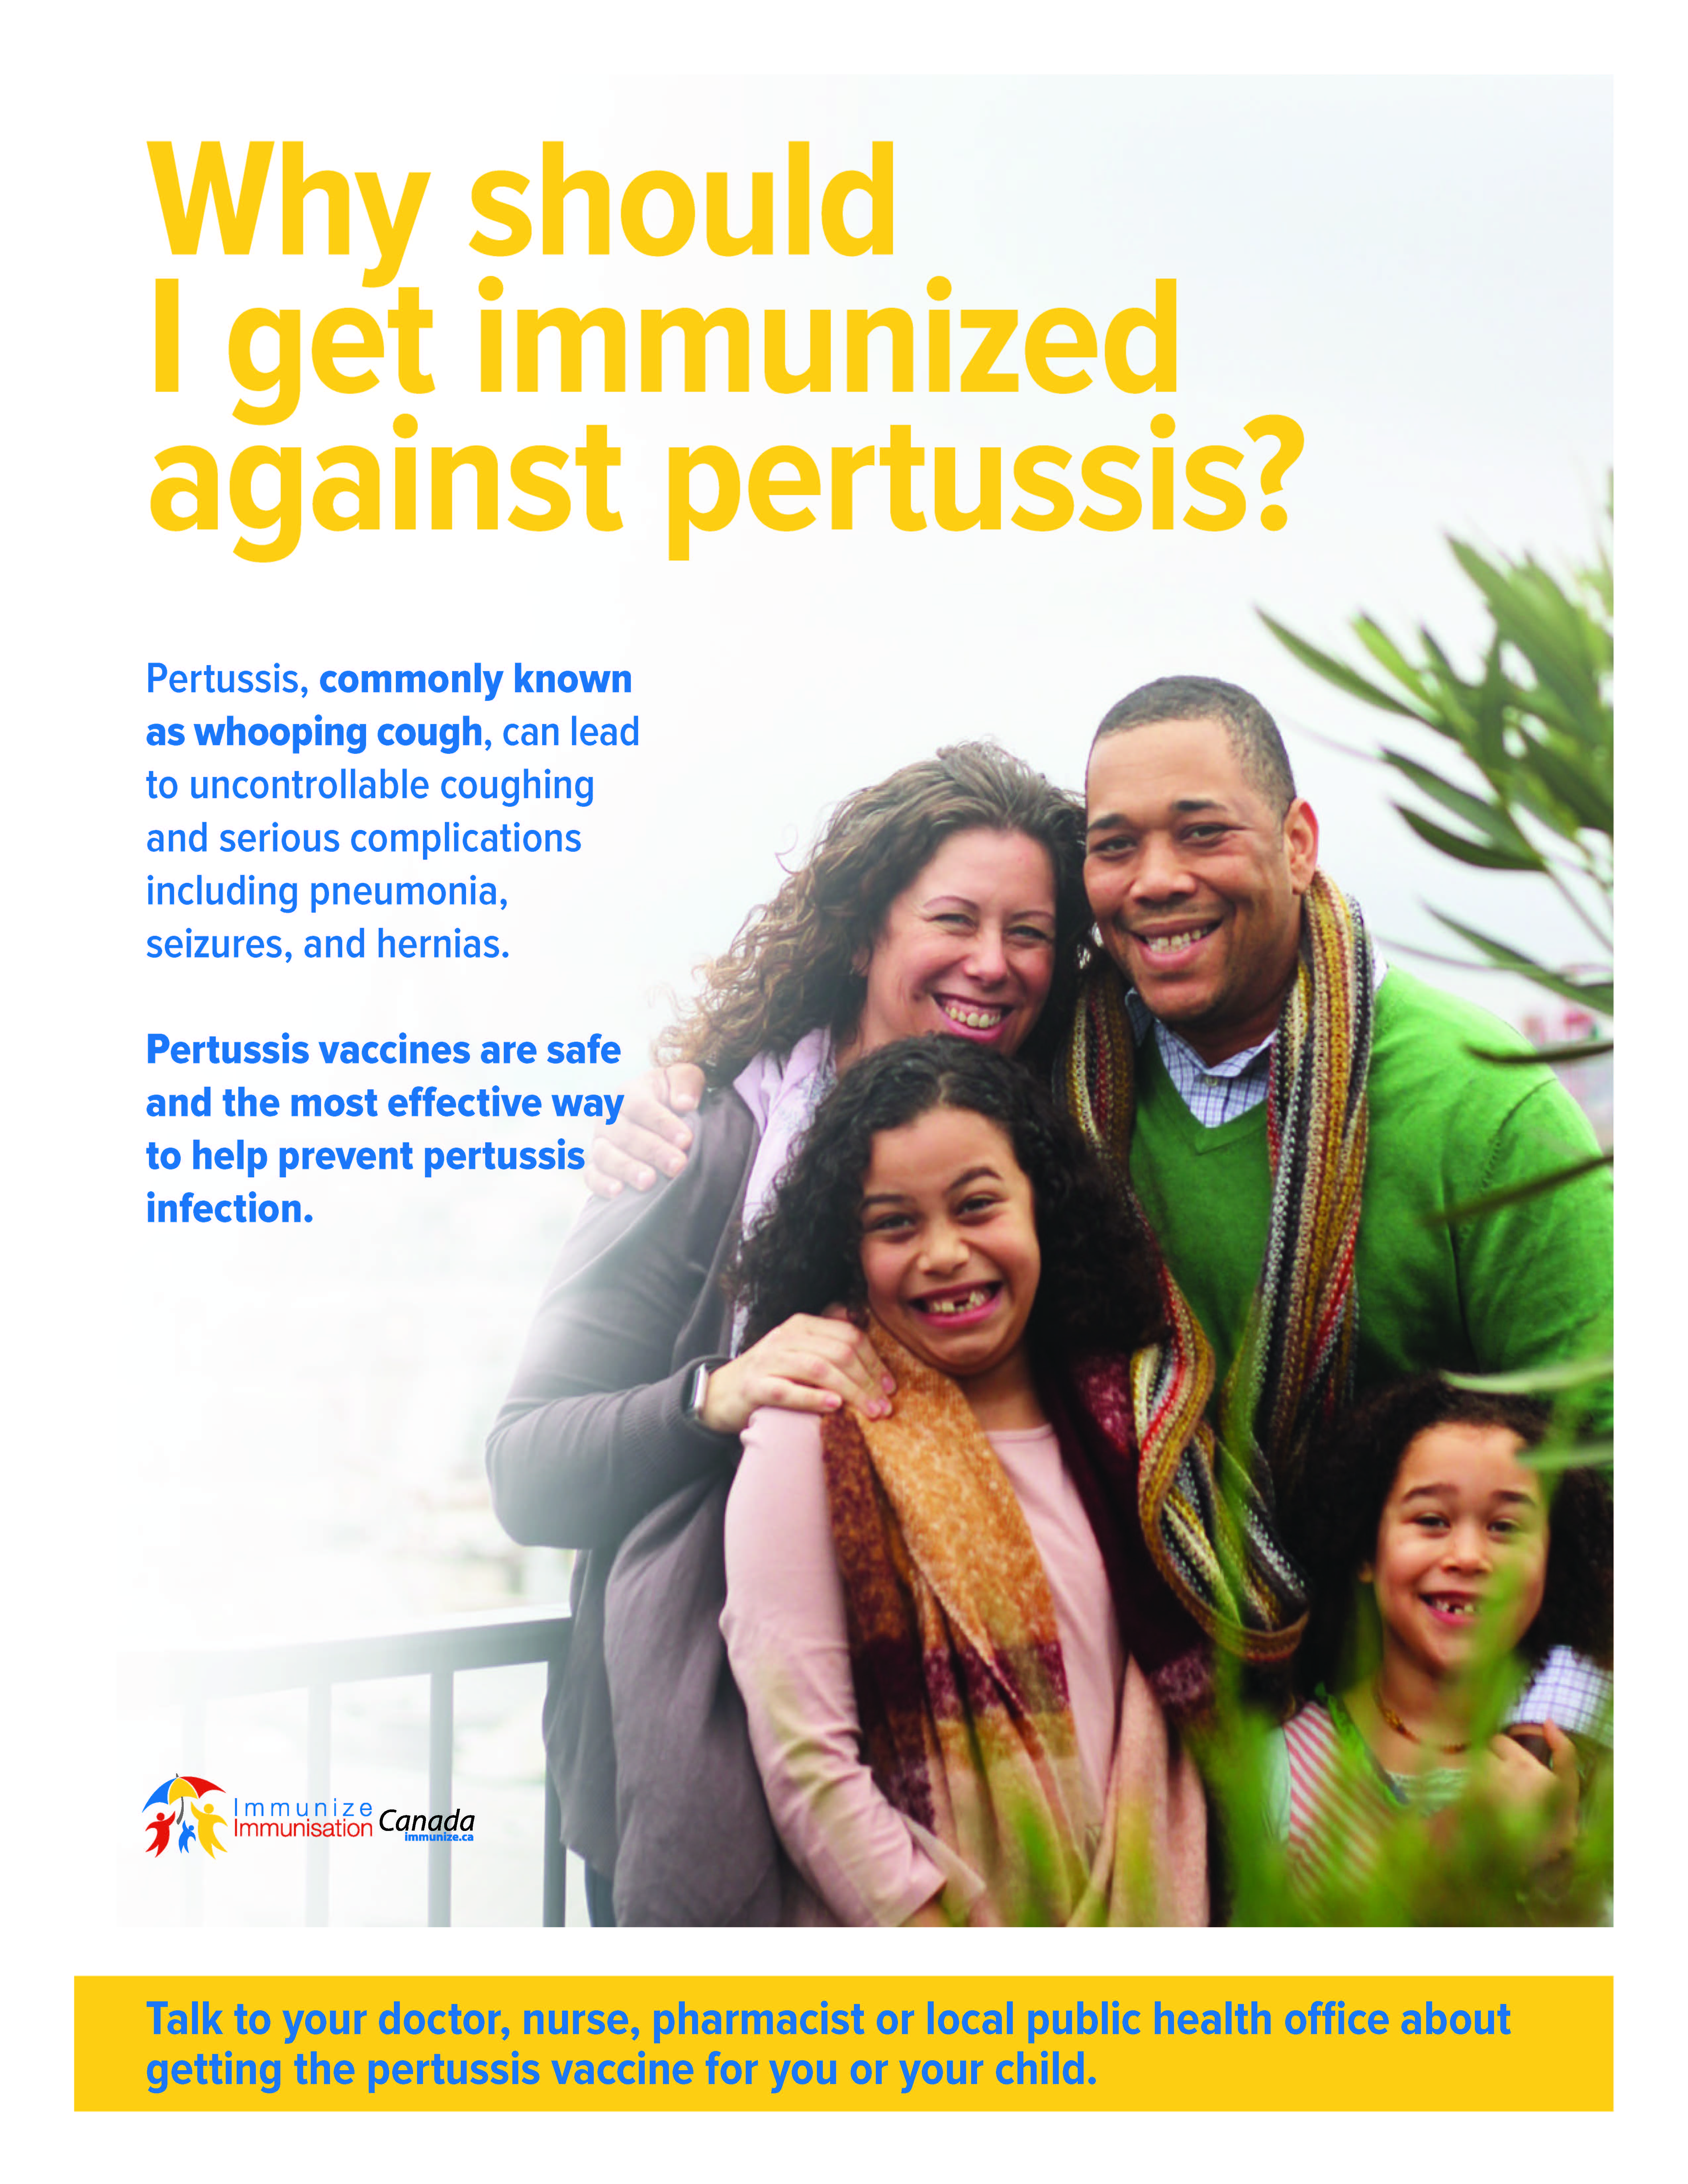 Why should I get immunized against pertussis?